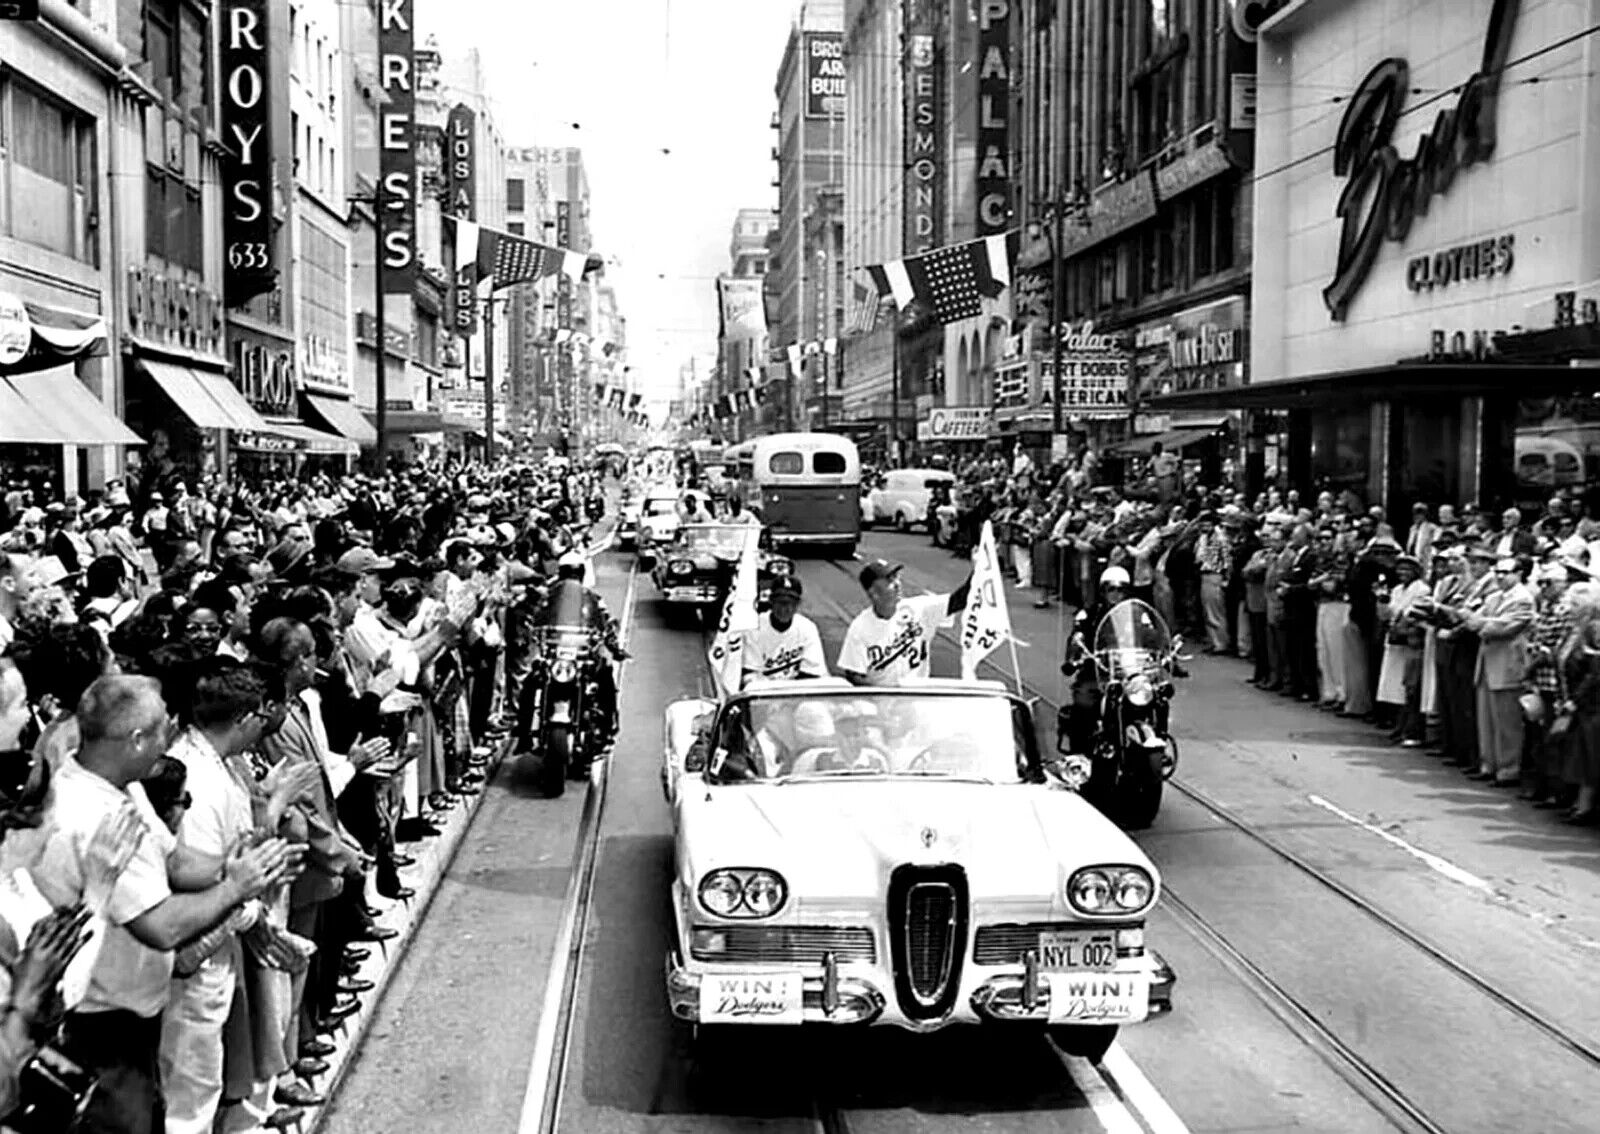 1958 DODGERS Arrival in Los Angeles PARADE Retro Baseball Poster Photo 13x19